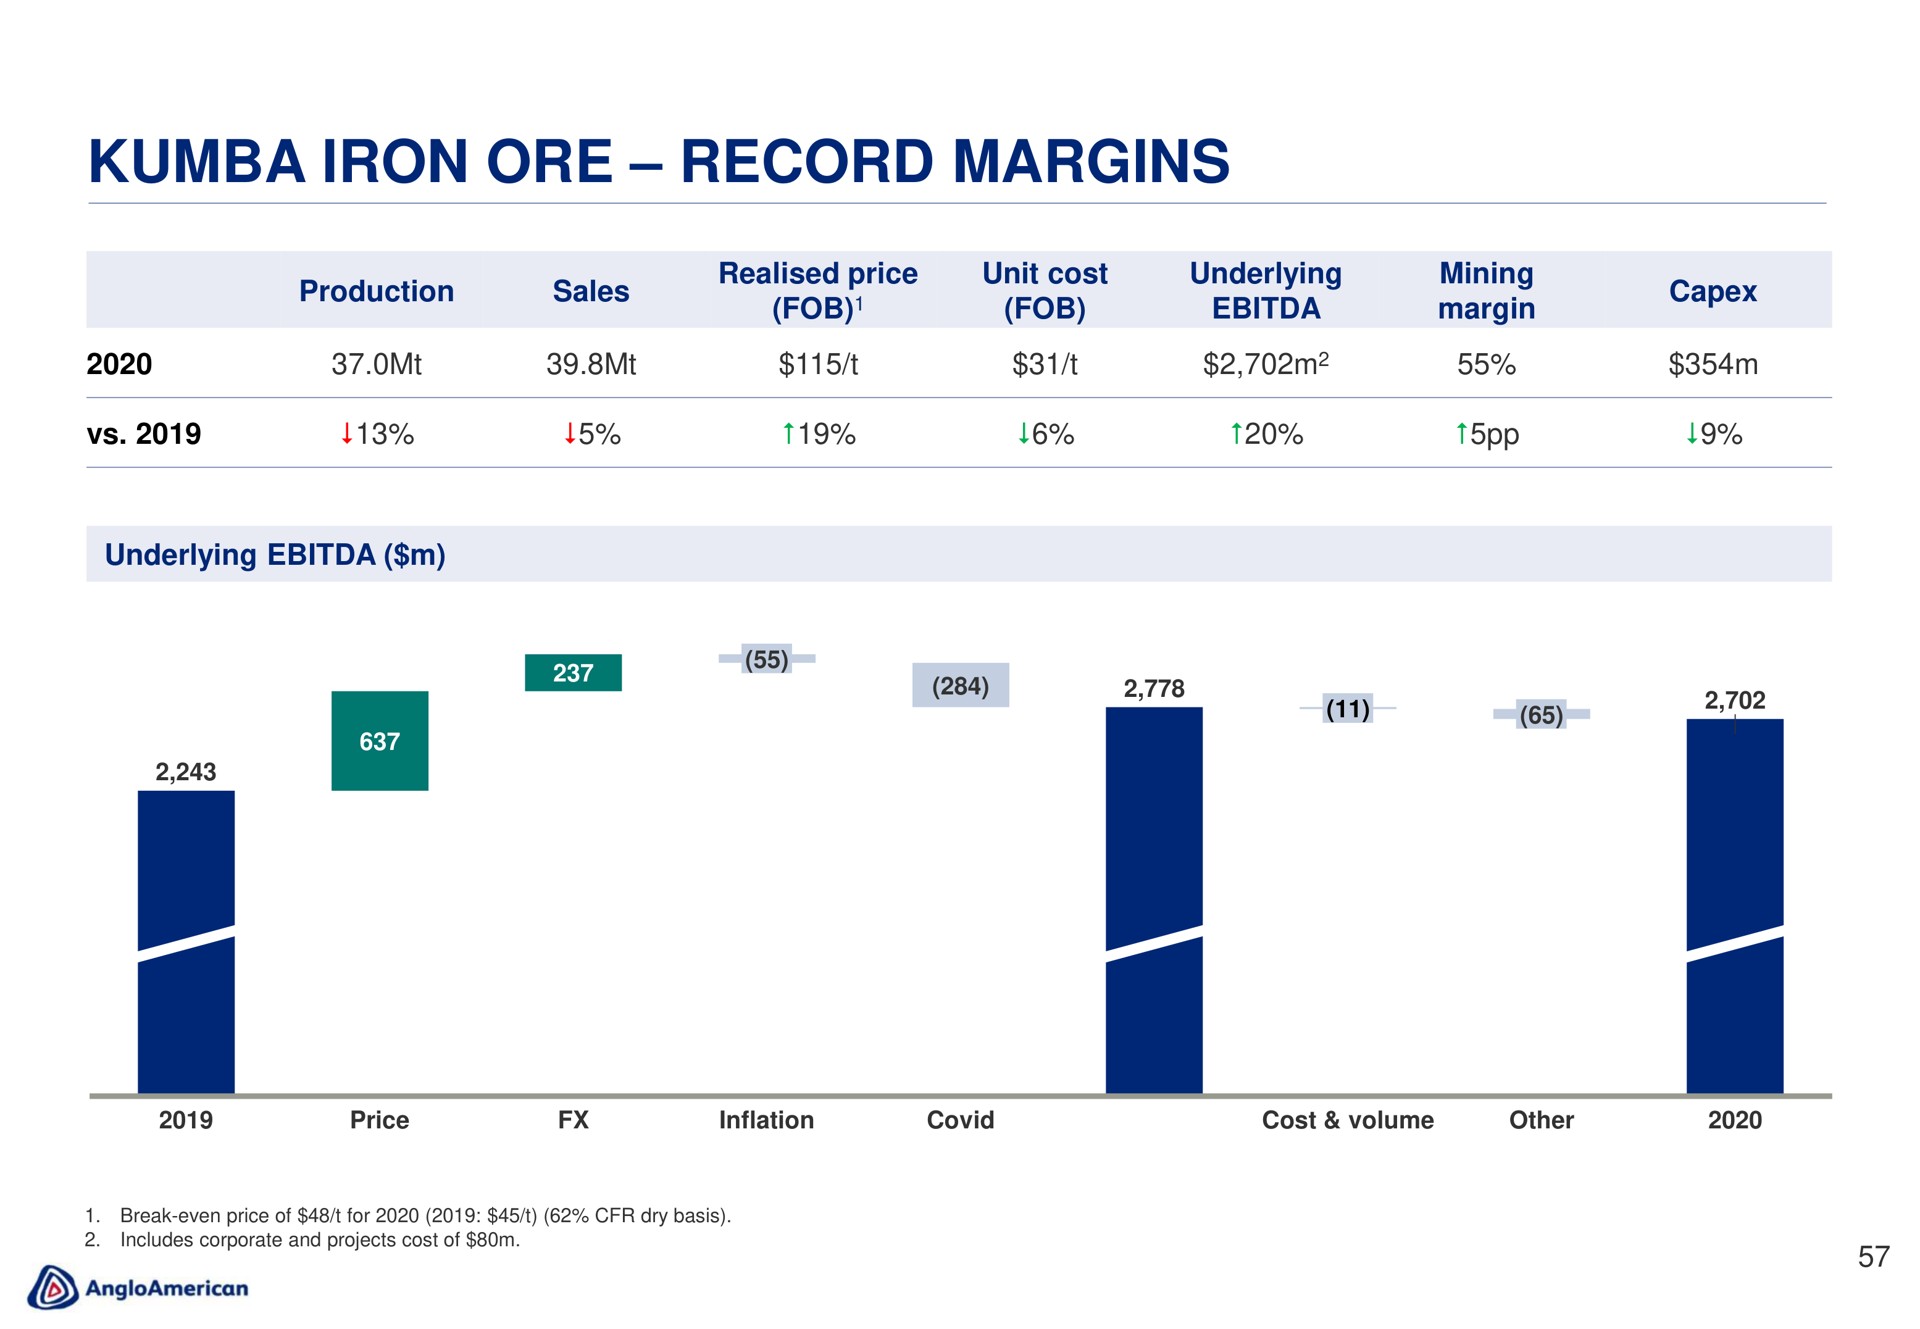 iron ore record margins | AngloAmerican